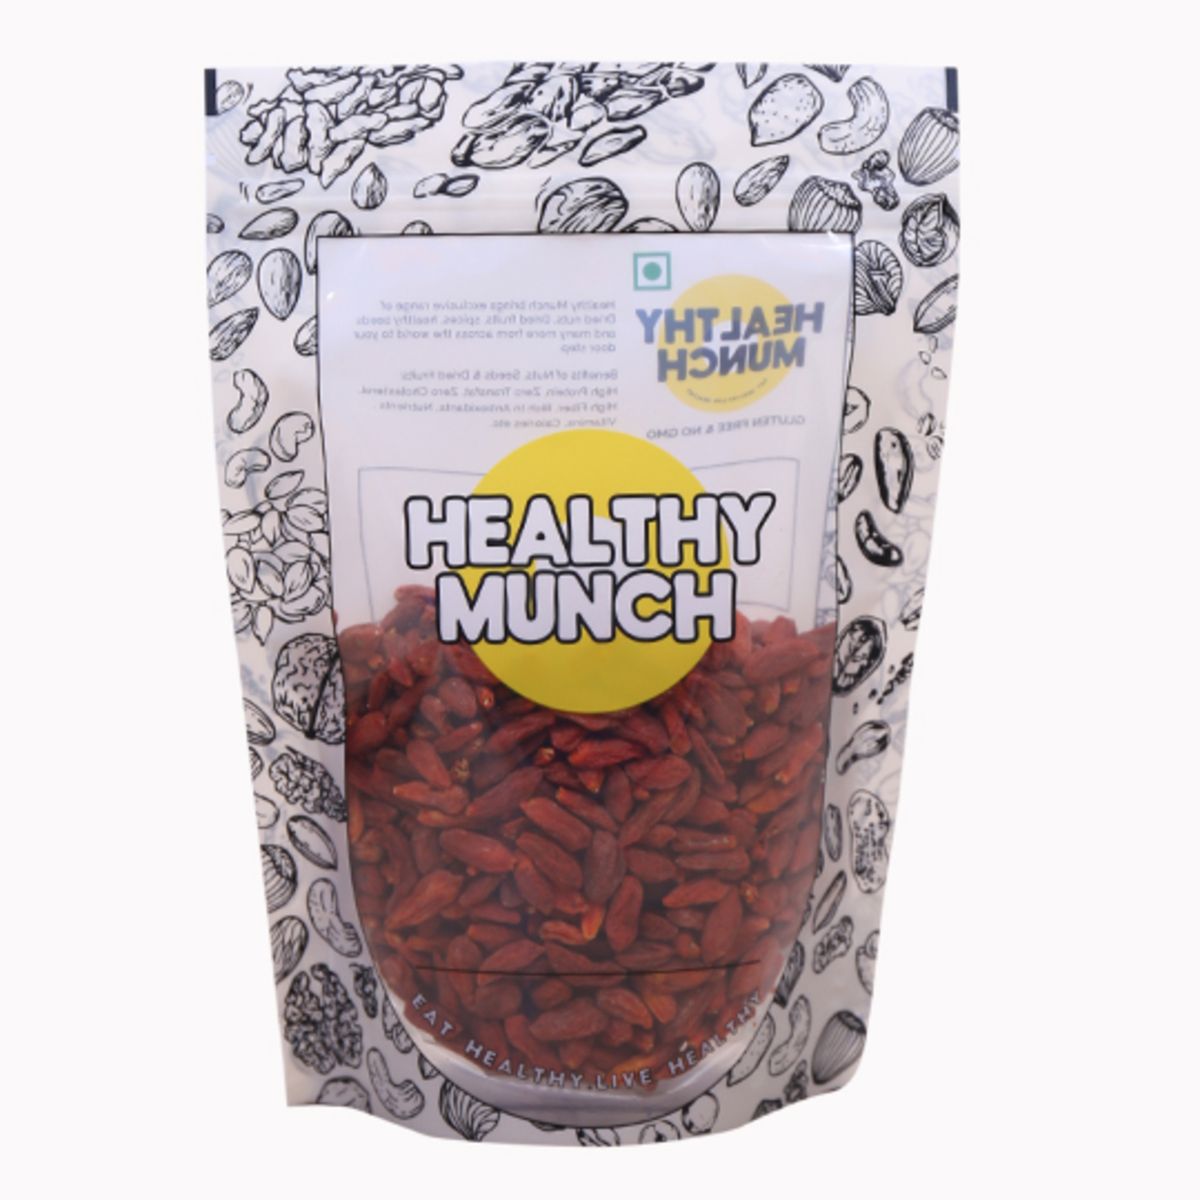 Buy Healthy Munch Himalayan Goji Berry 200 gms at Best Price Online